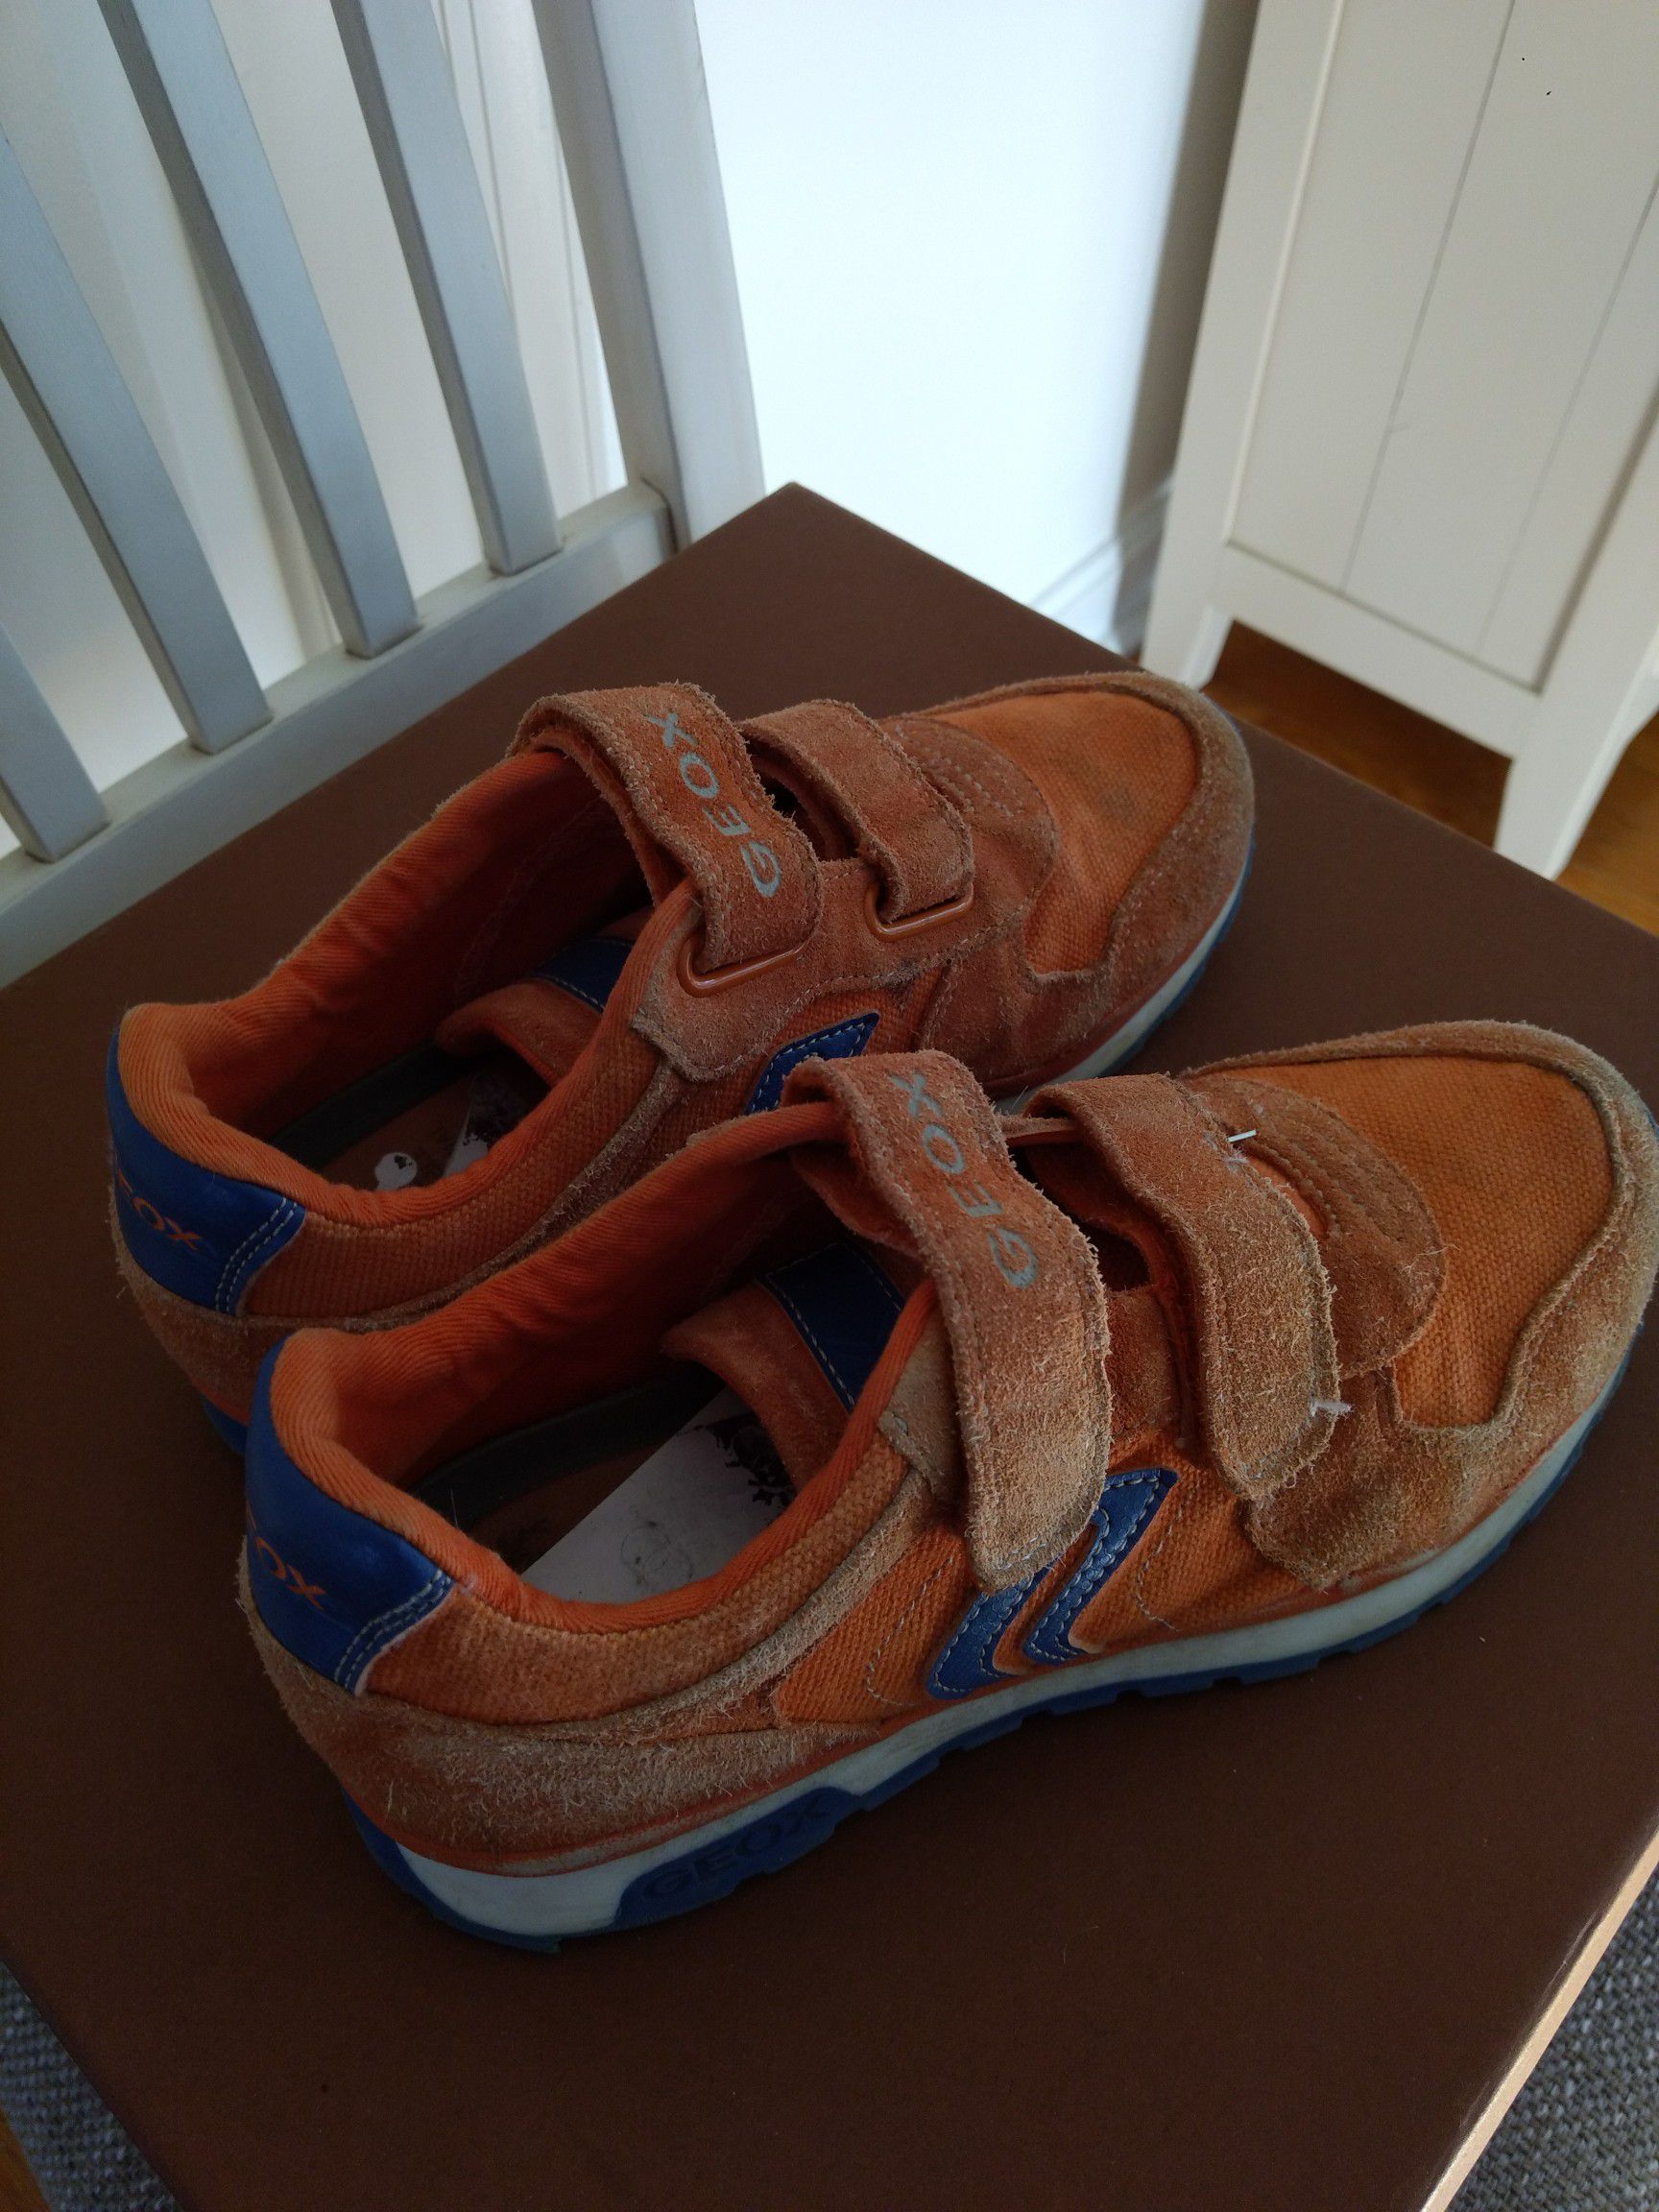 Tennis Shoes, size 3, by GEOX, Italian.